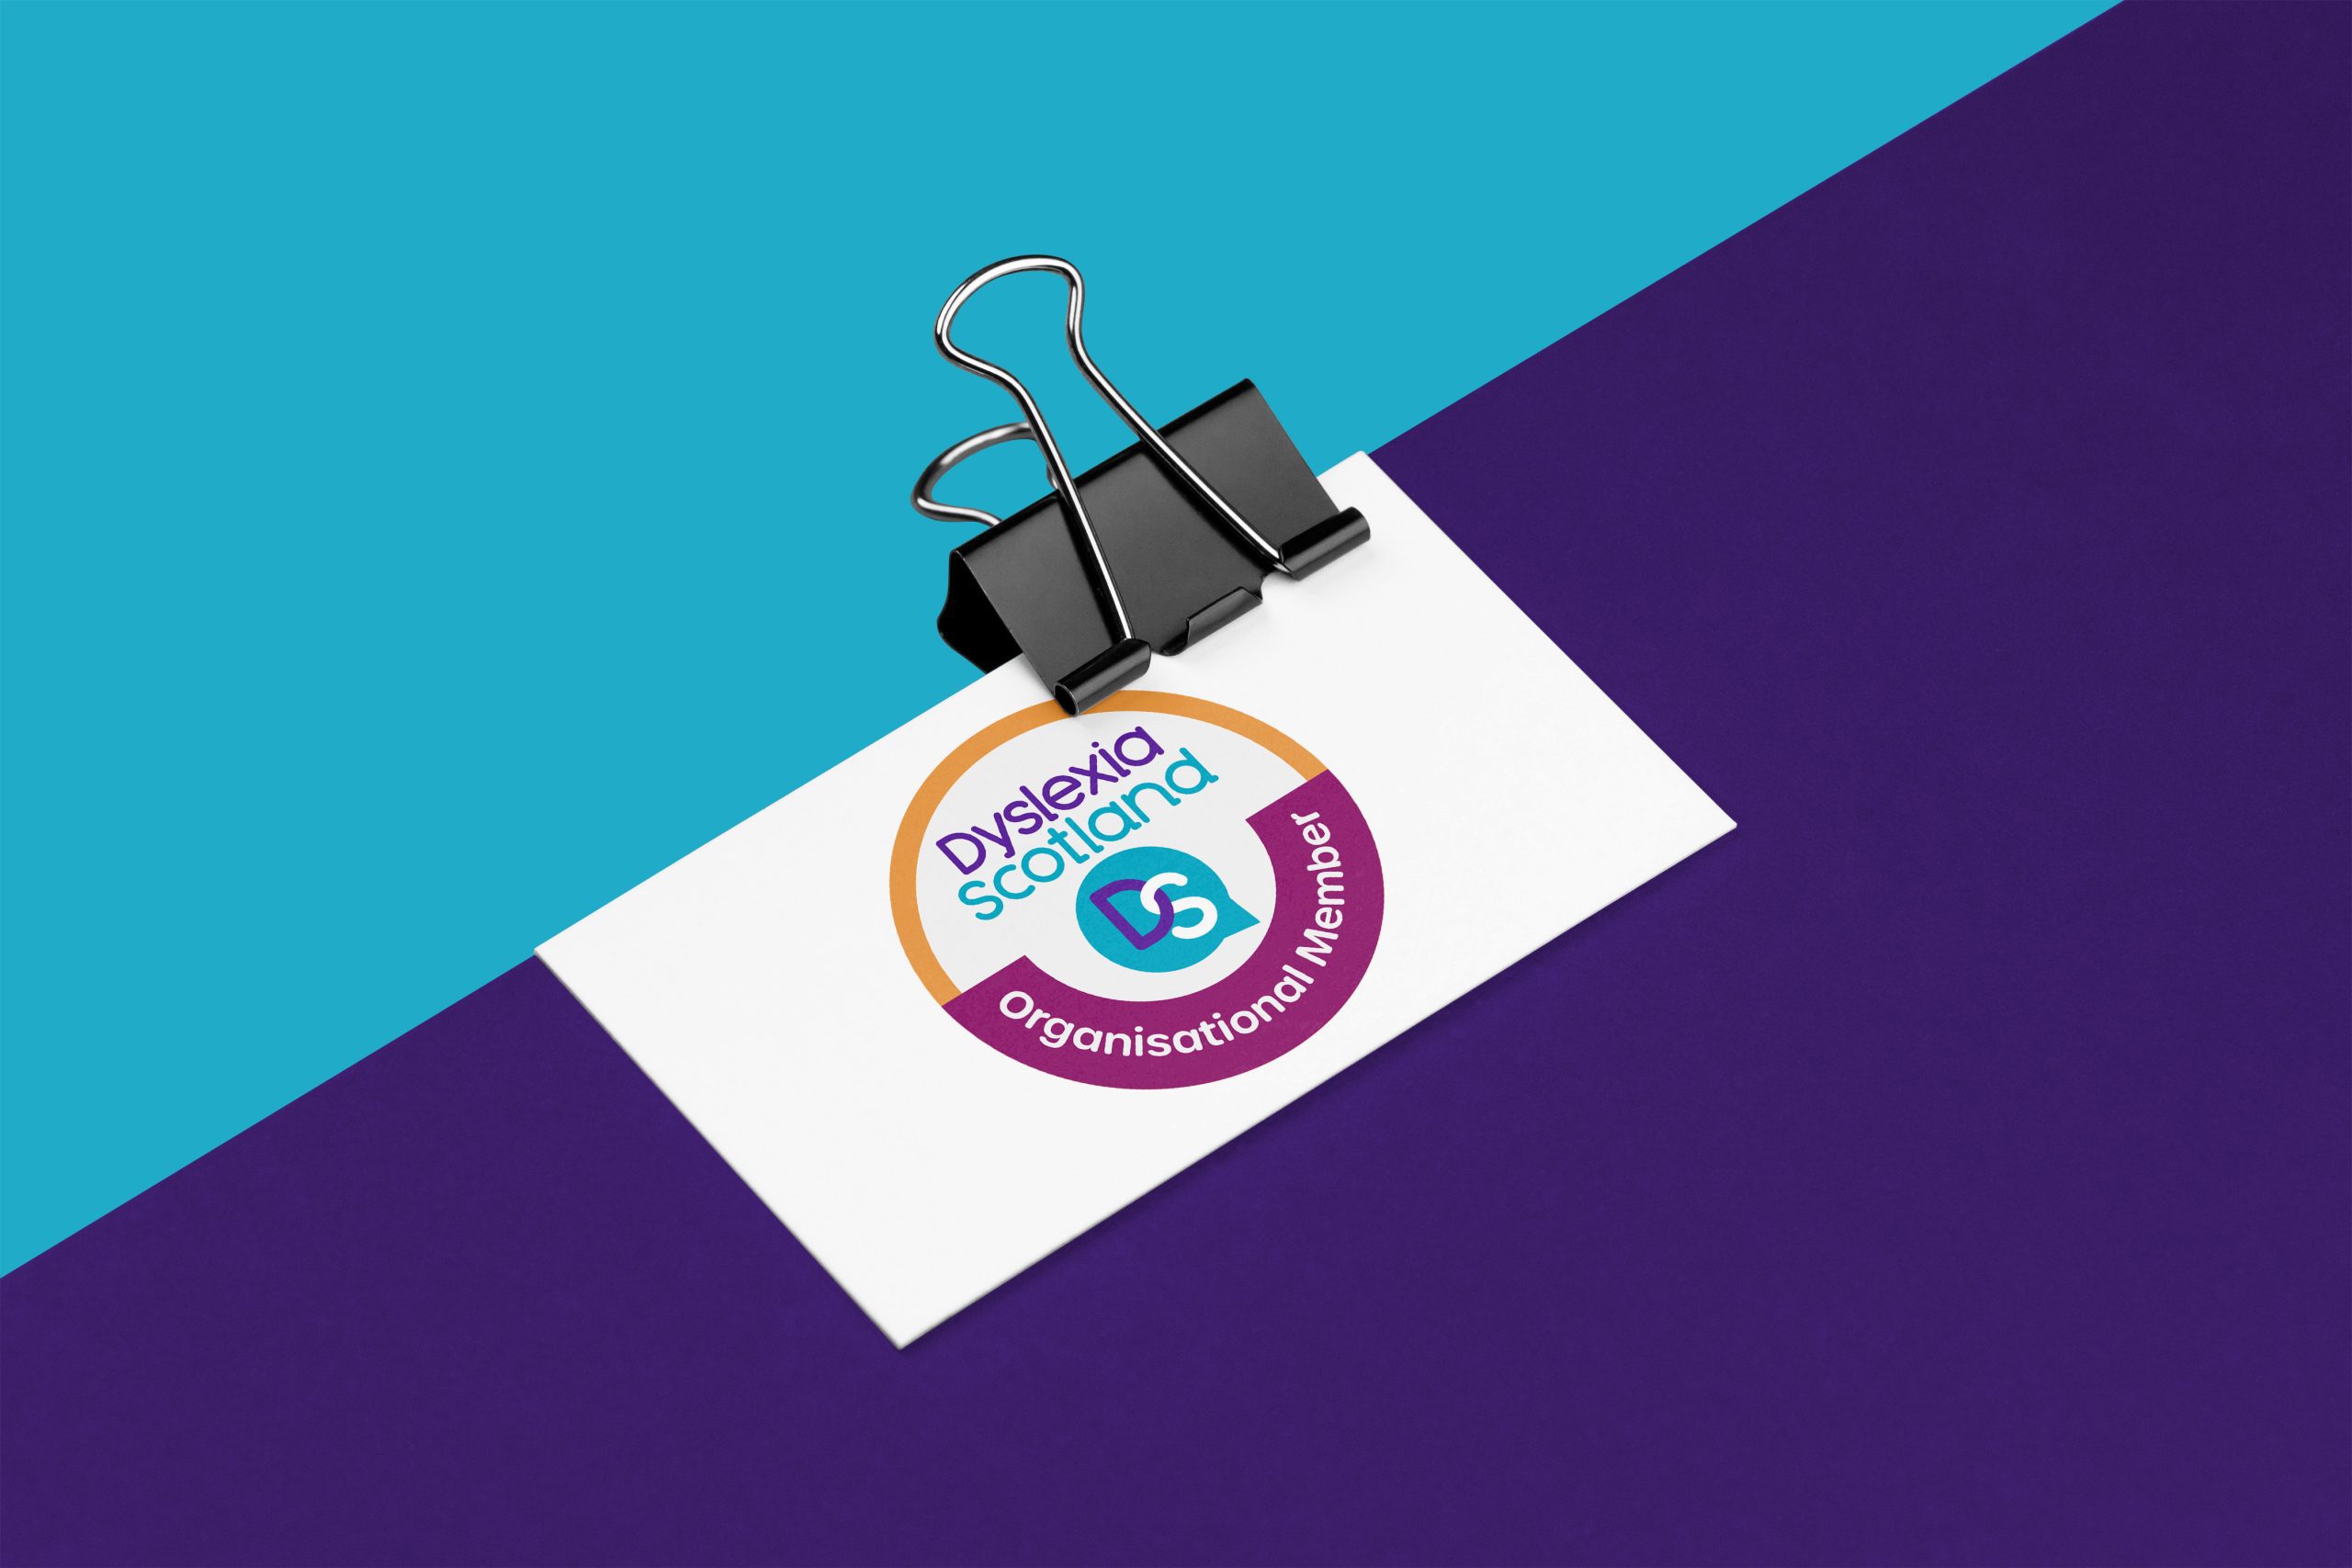 Business card with Dyslexia Scotland organisational member badge clipped to a purple paper.